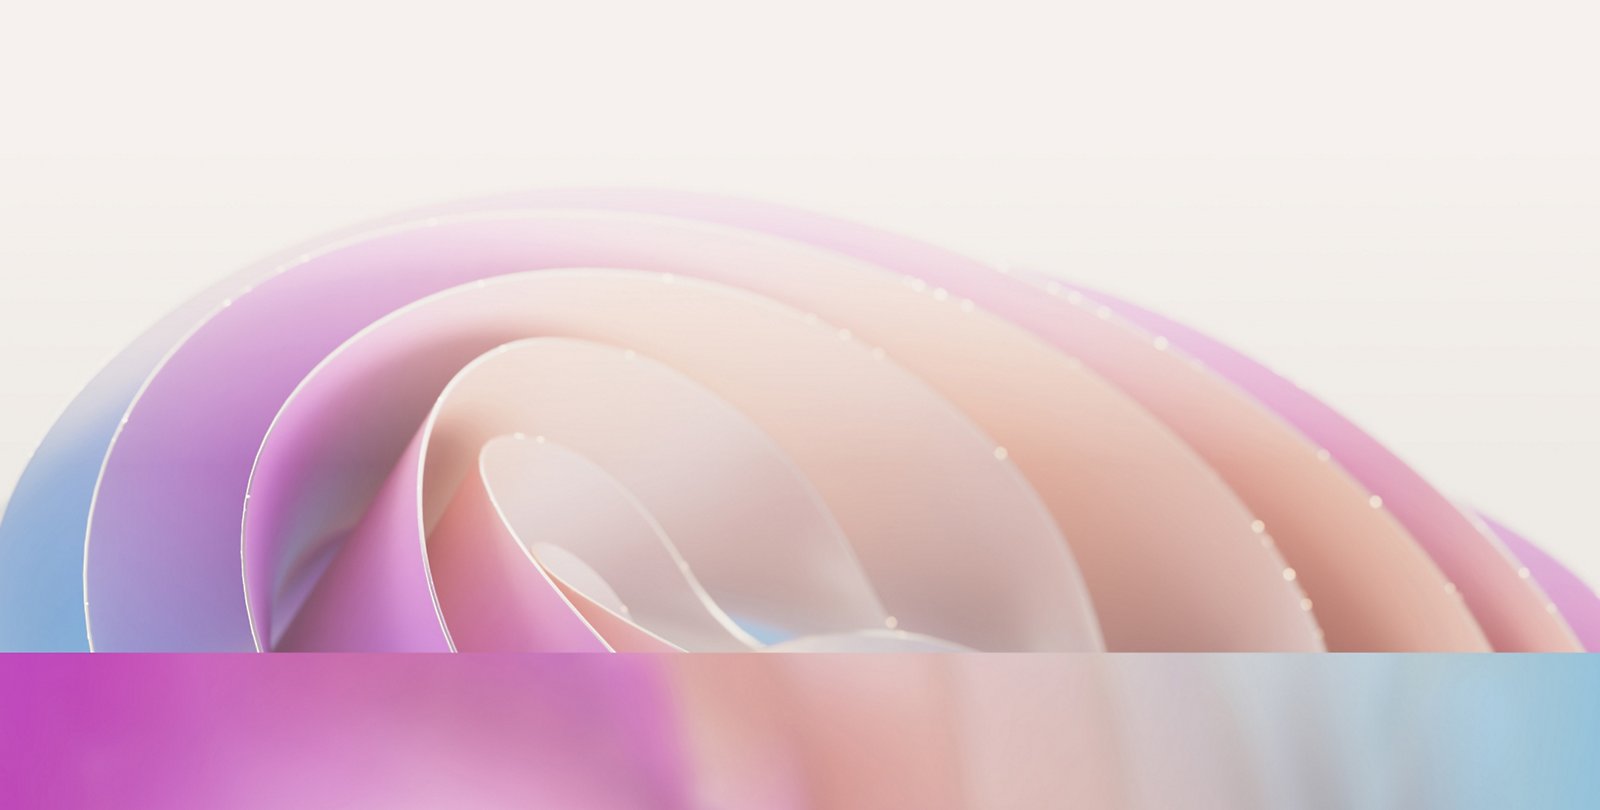 Abstract image featuring soft, overlapping pastel curves in shades of pink, purple, and blue, creating a gentle wave-like pattern.